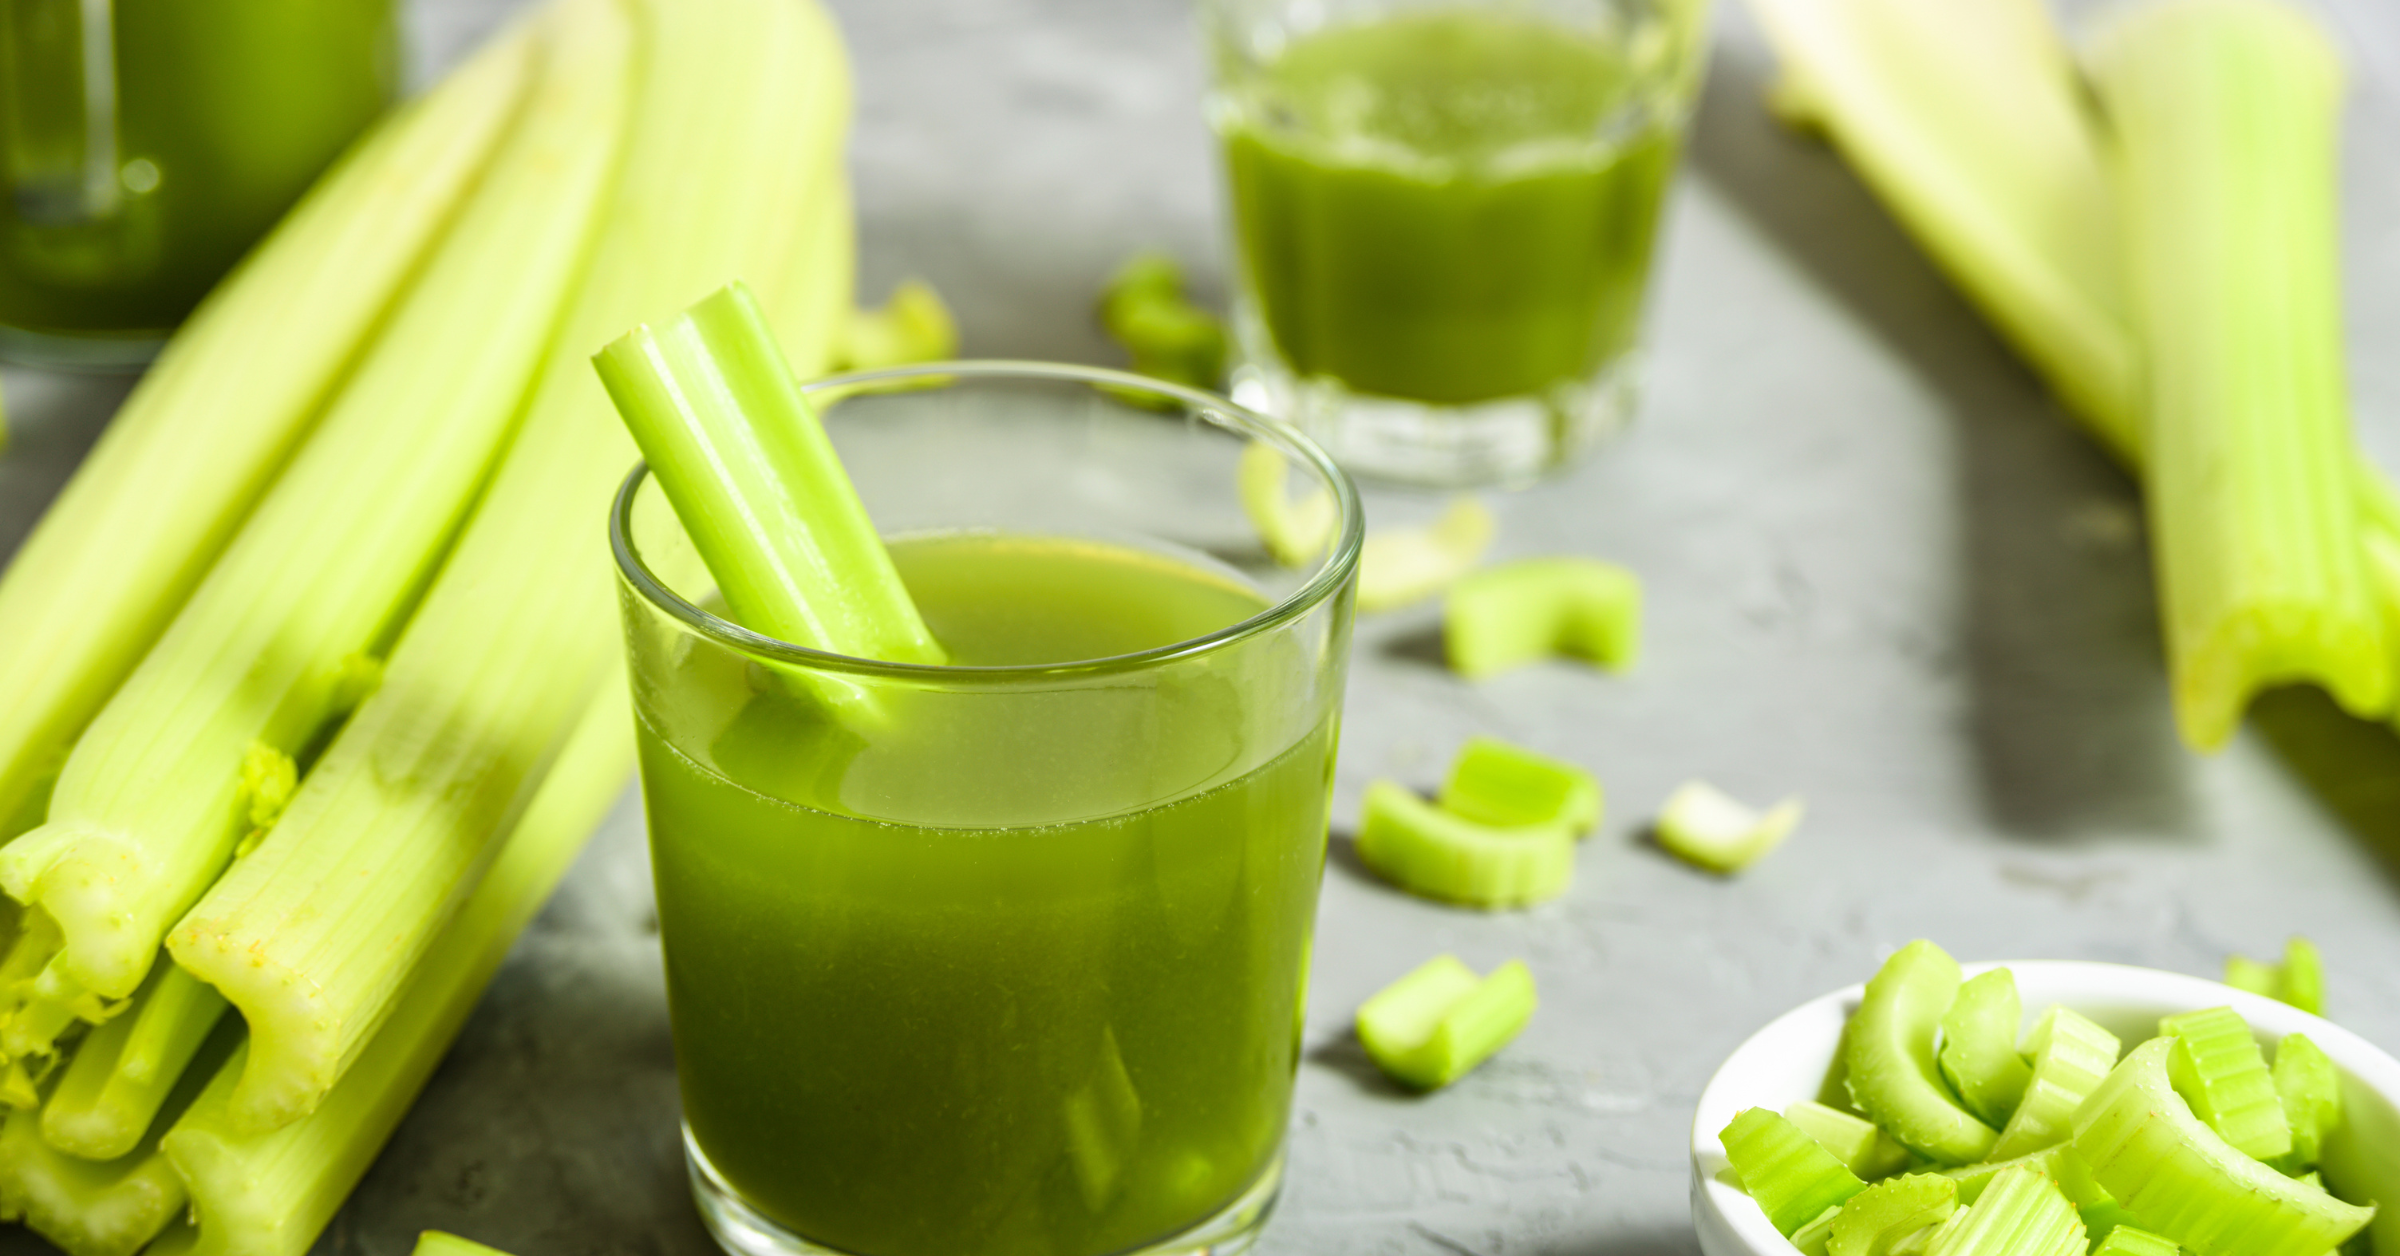 Learn all about the benefits of celery juice, and the essential functions of vitamin A in the body